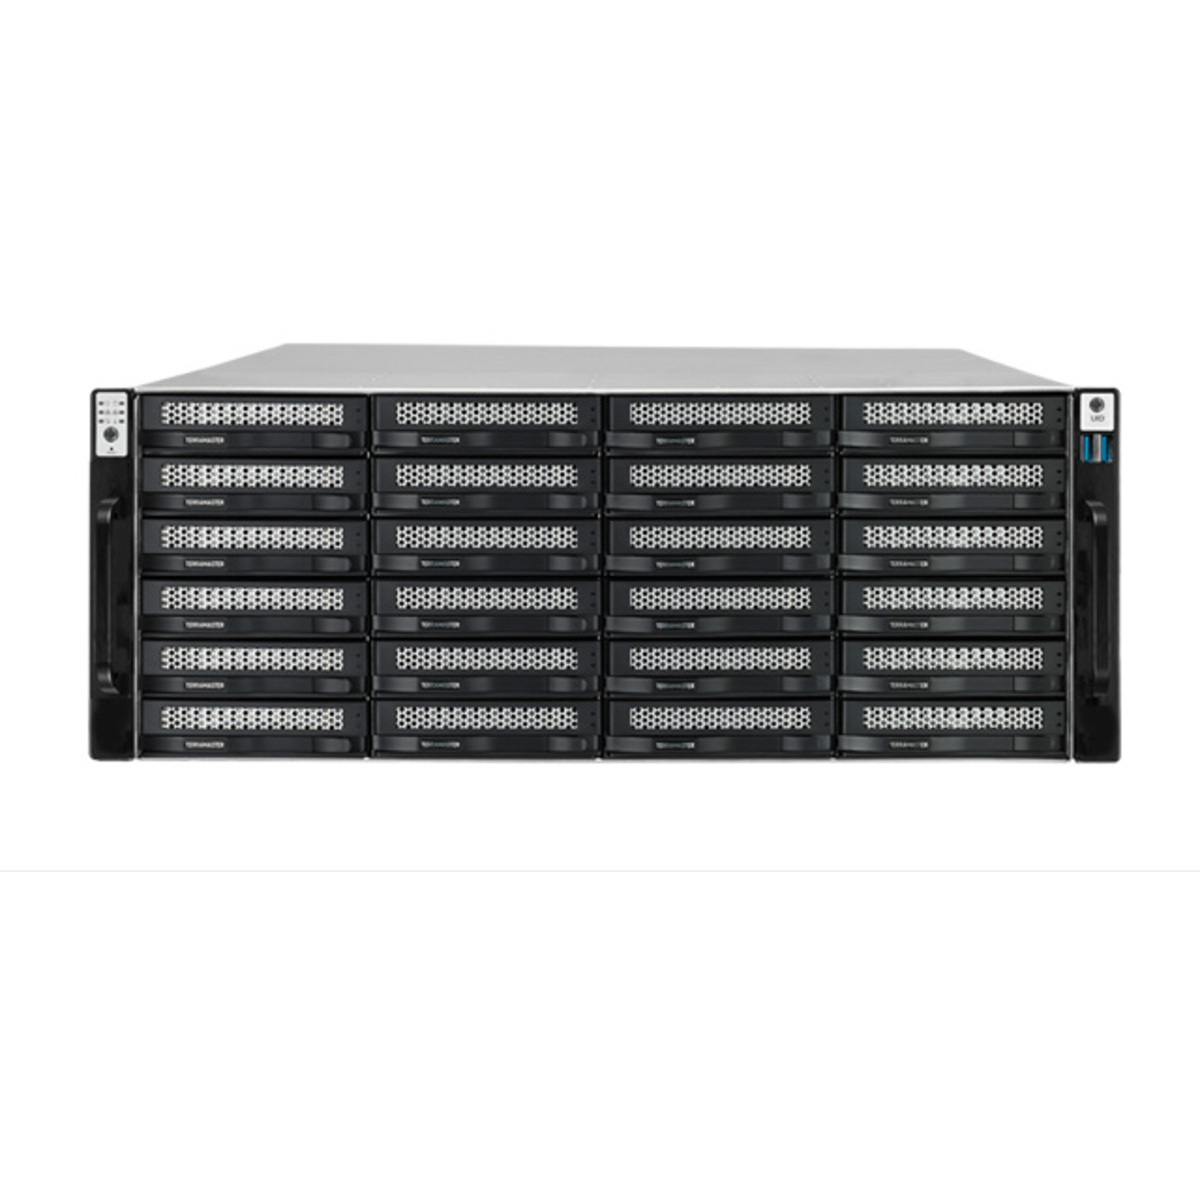 TerraMaster U24-722-2224 304tb 24-Bay RackMount Large Business / Enterprise NAS - Network Attached Storage Device 19x16tb Seagate EXOS X18 ST16000NM000J 3.5 7200rpm SATA 6Gb/s HDD ENTERPRISE Class Drives Installed - Burn-In Tested U24-722-2224